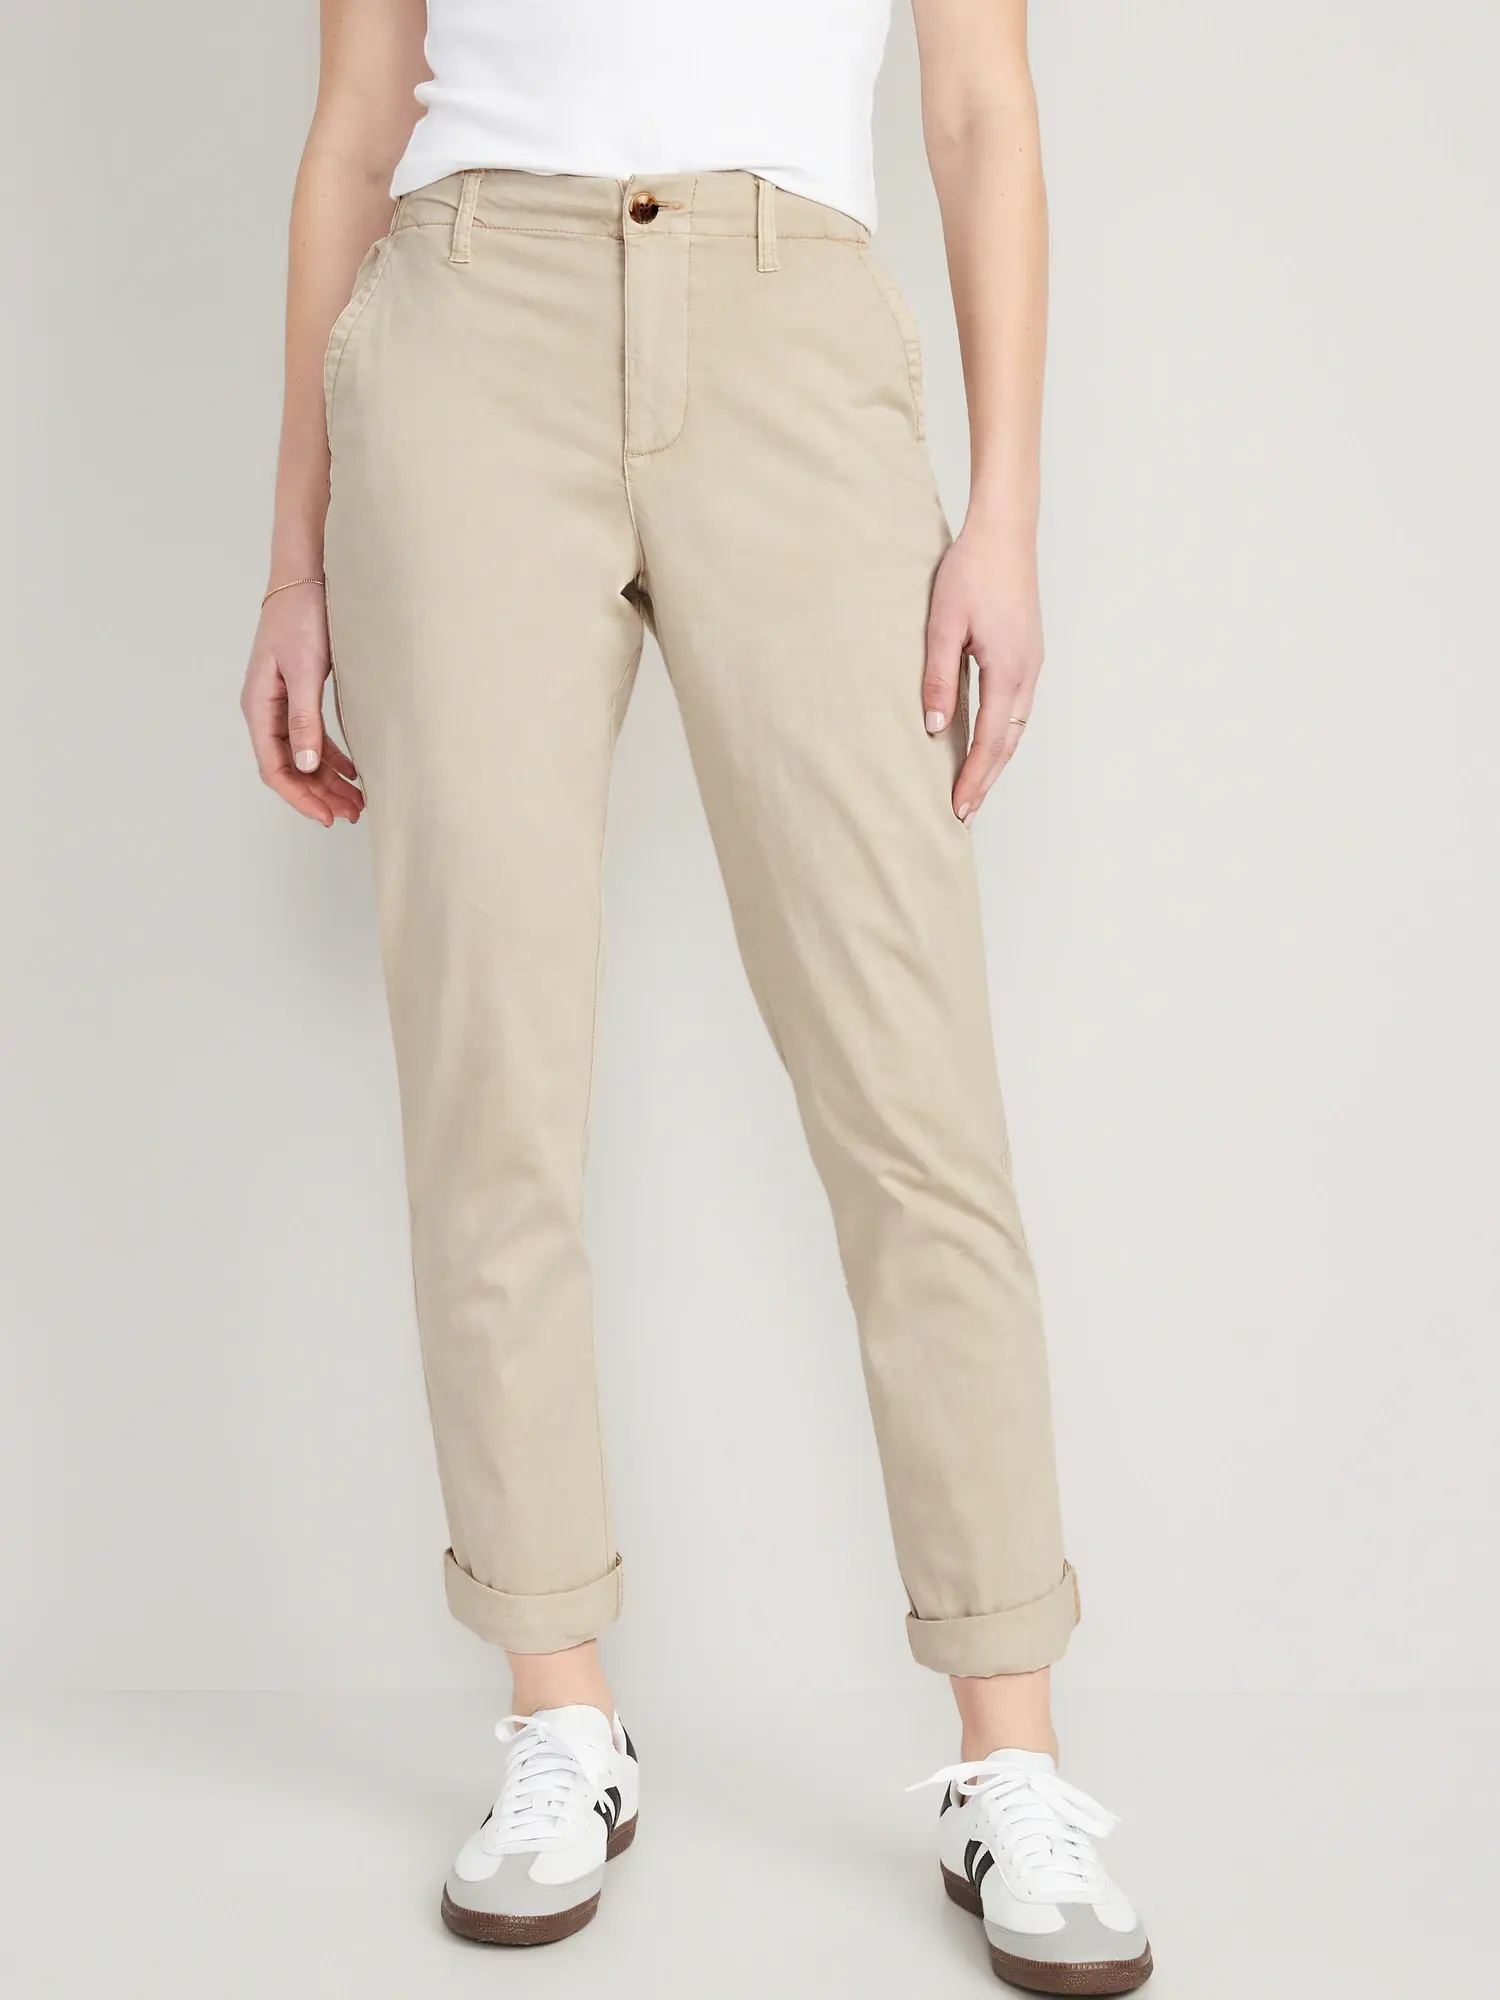 Old Navy High-Waisted OGC Chino Pants for Women beige. 1